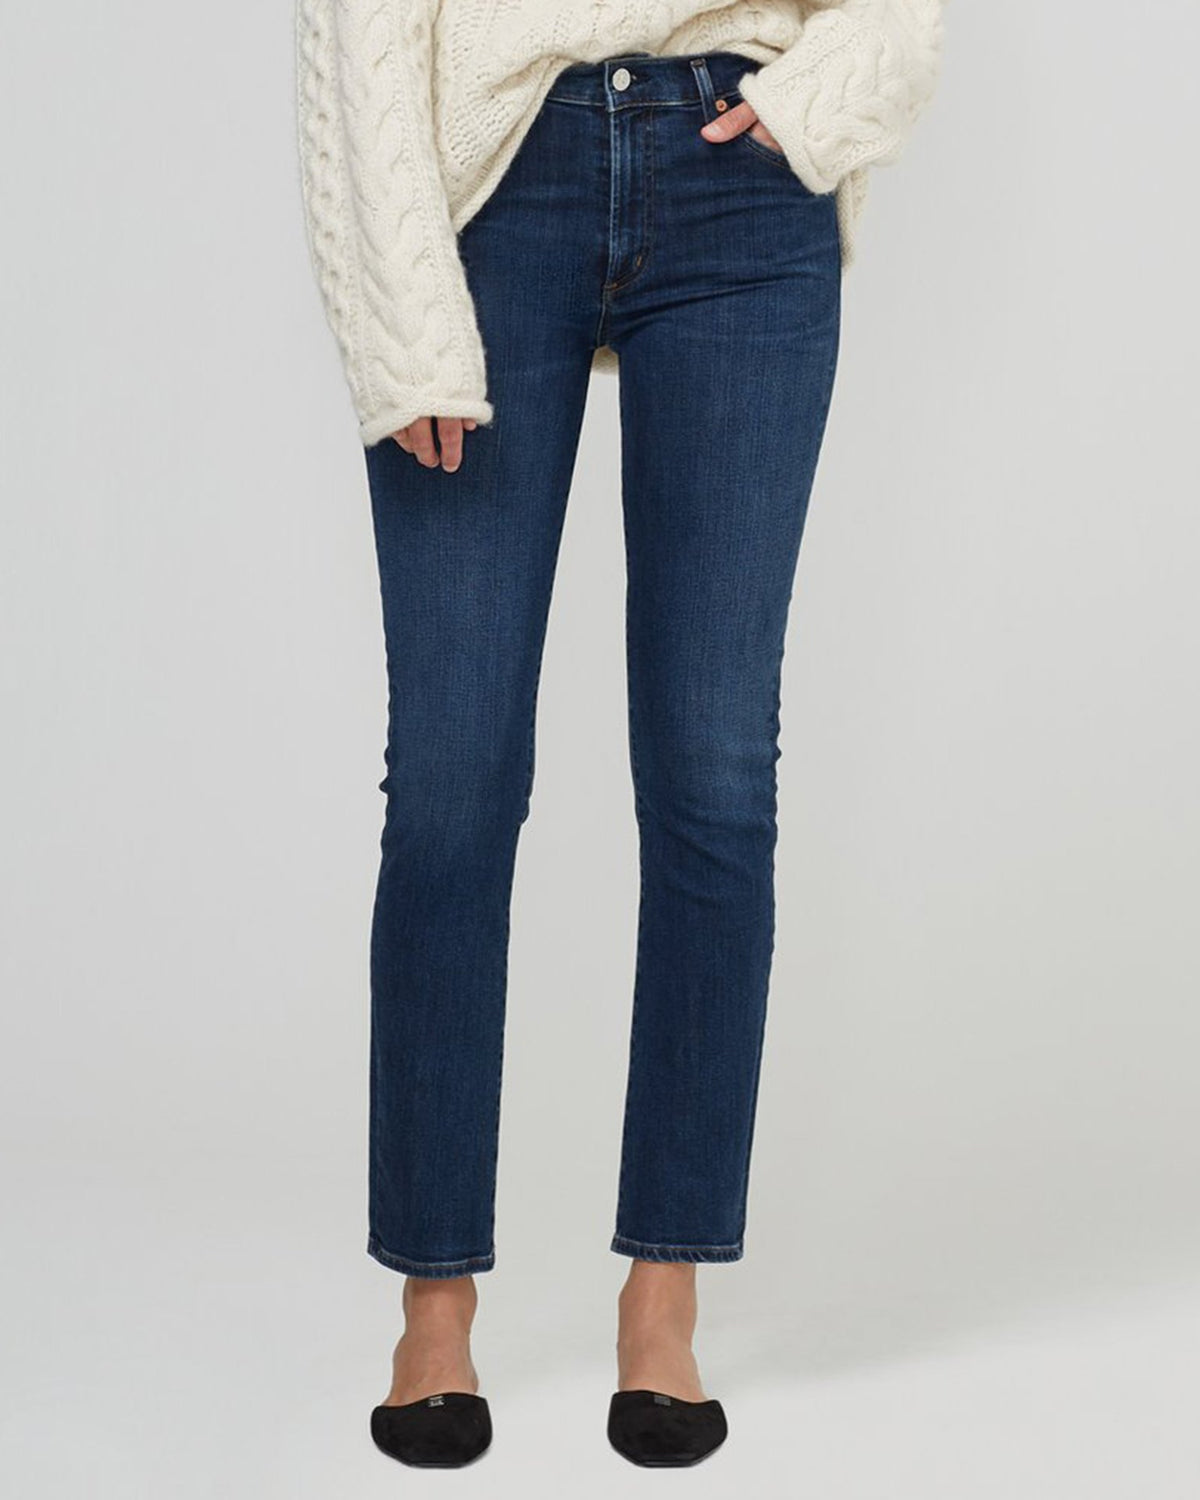 Citizens of Humanity Denim Skyla in Evermore